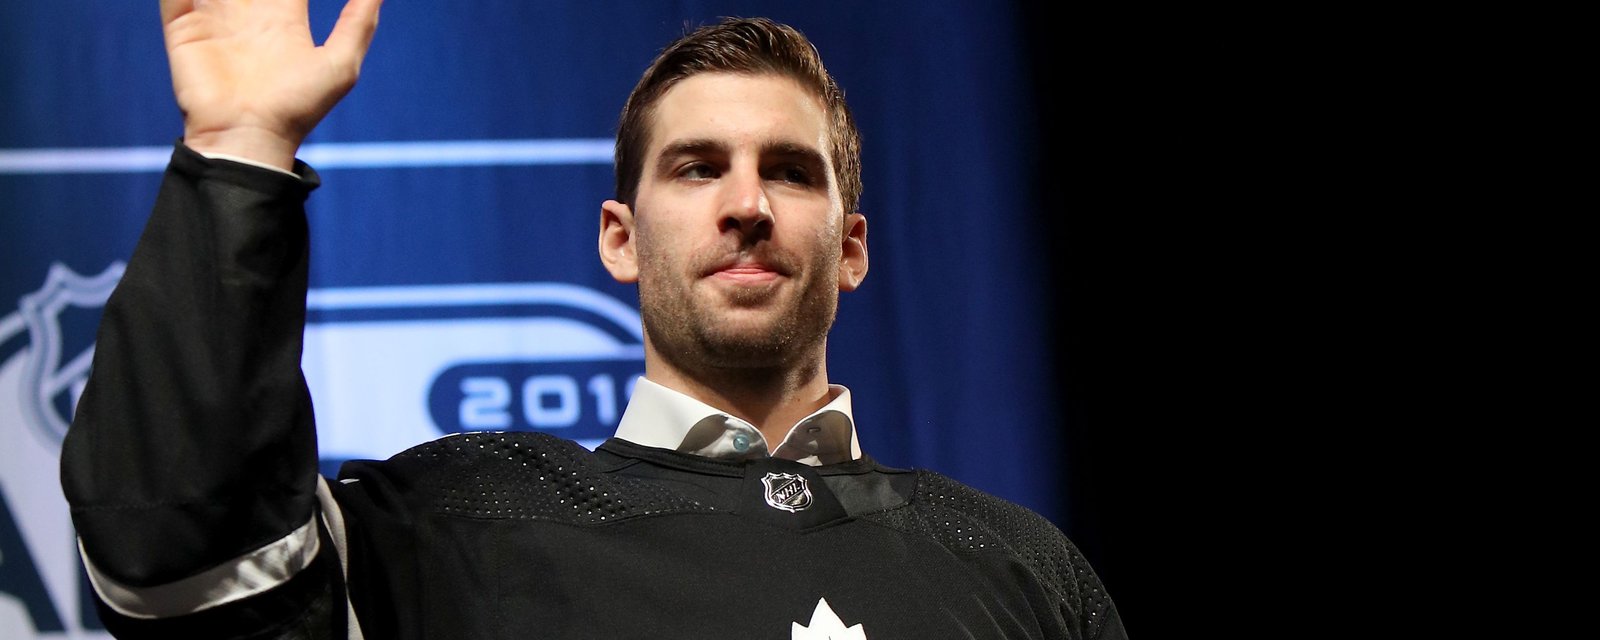 Tavares gets booed during his introduction at NHL All-Star media day